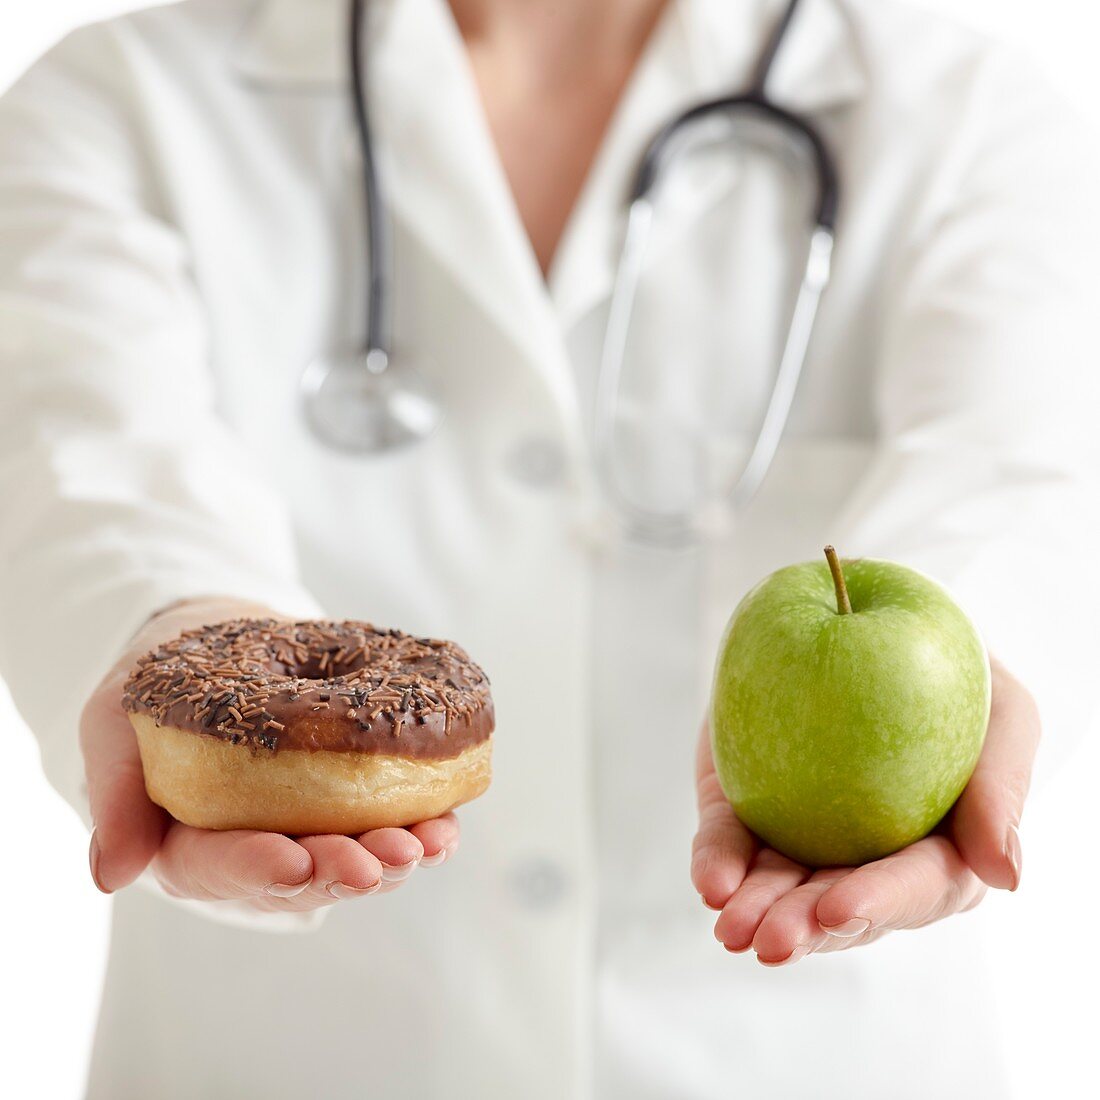 Doctor holding an apple and a doughnut